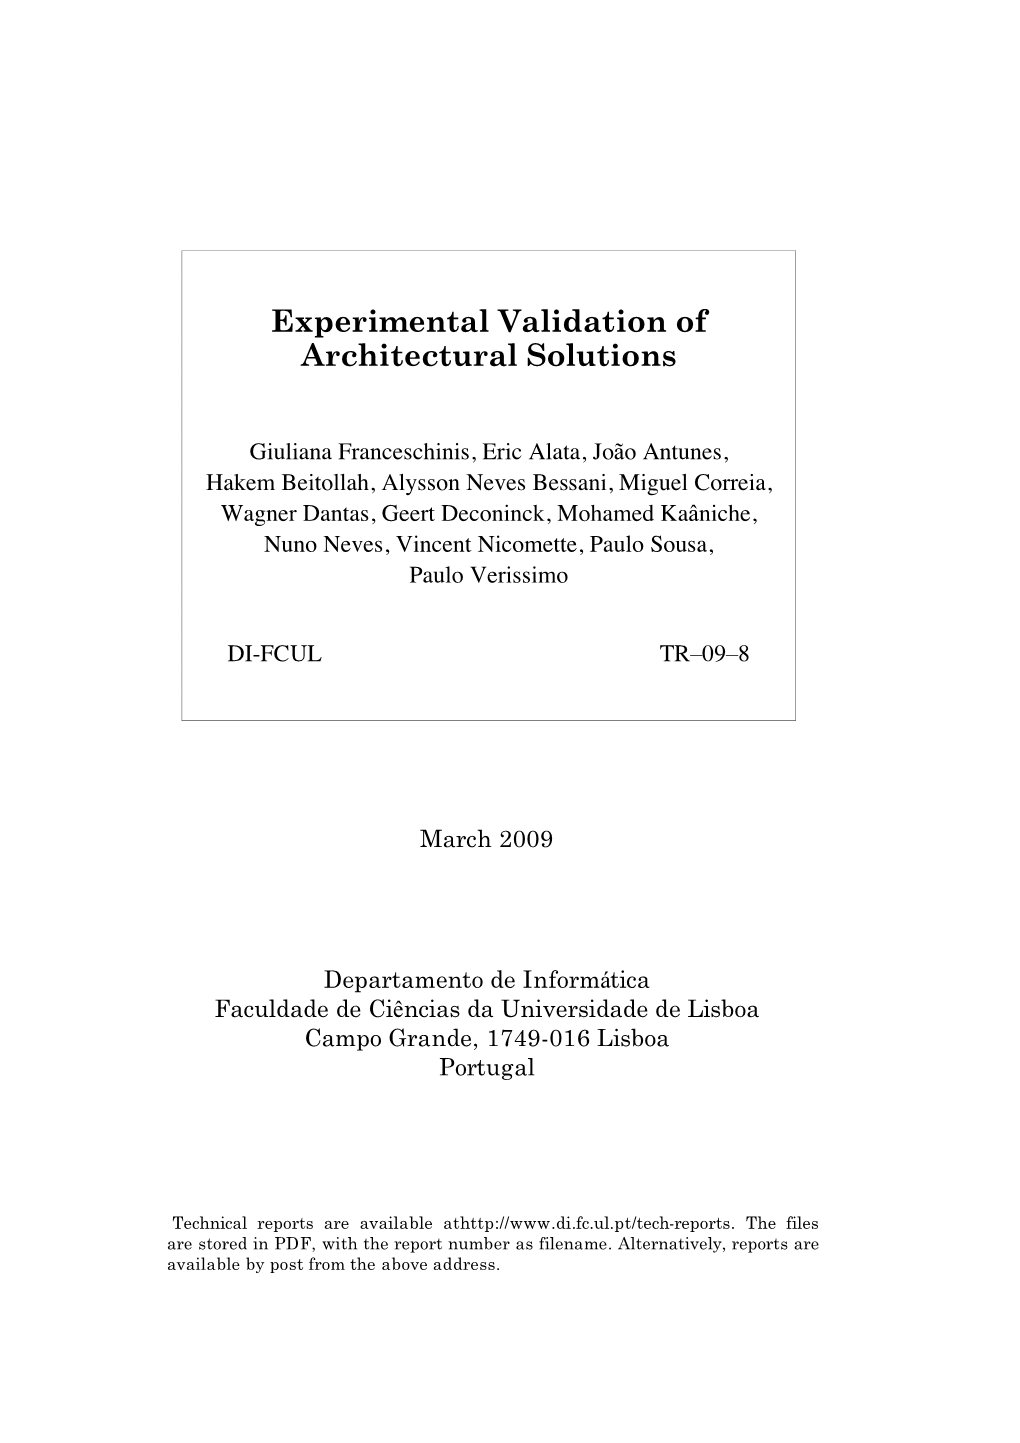 Experimental Validation of Architectural Solutions